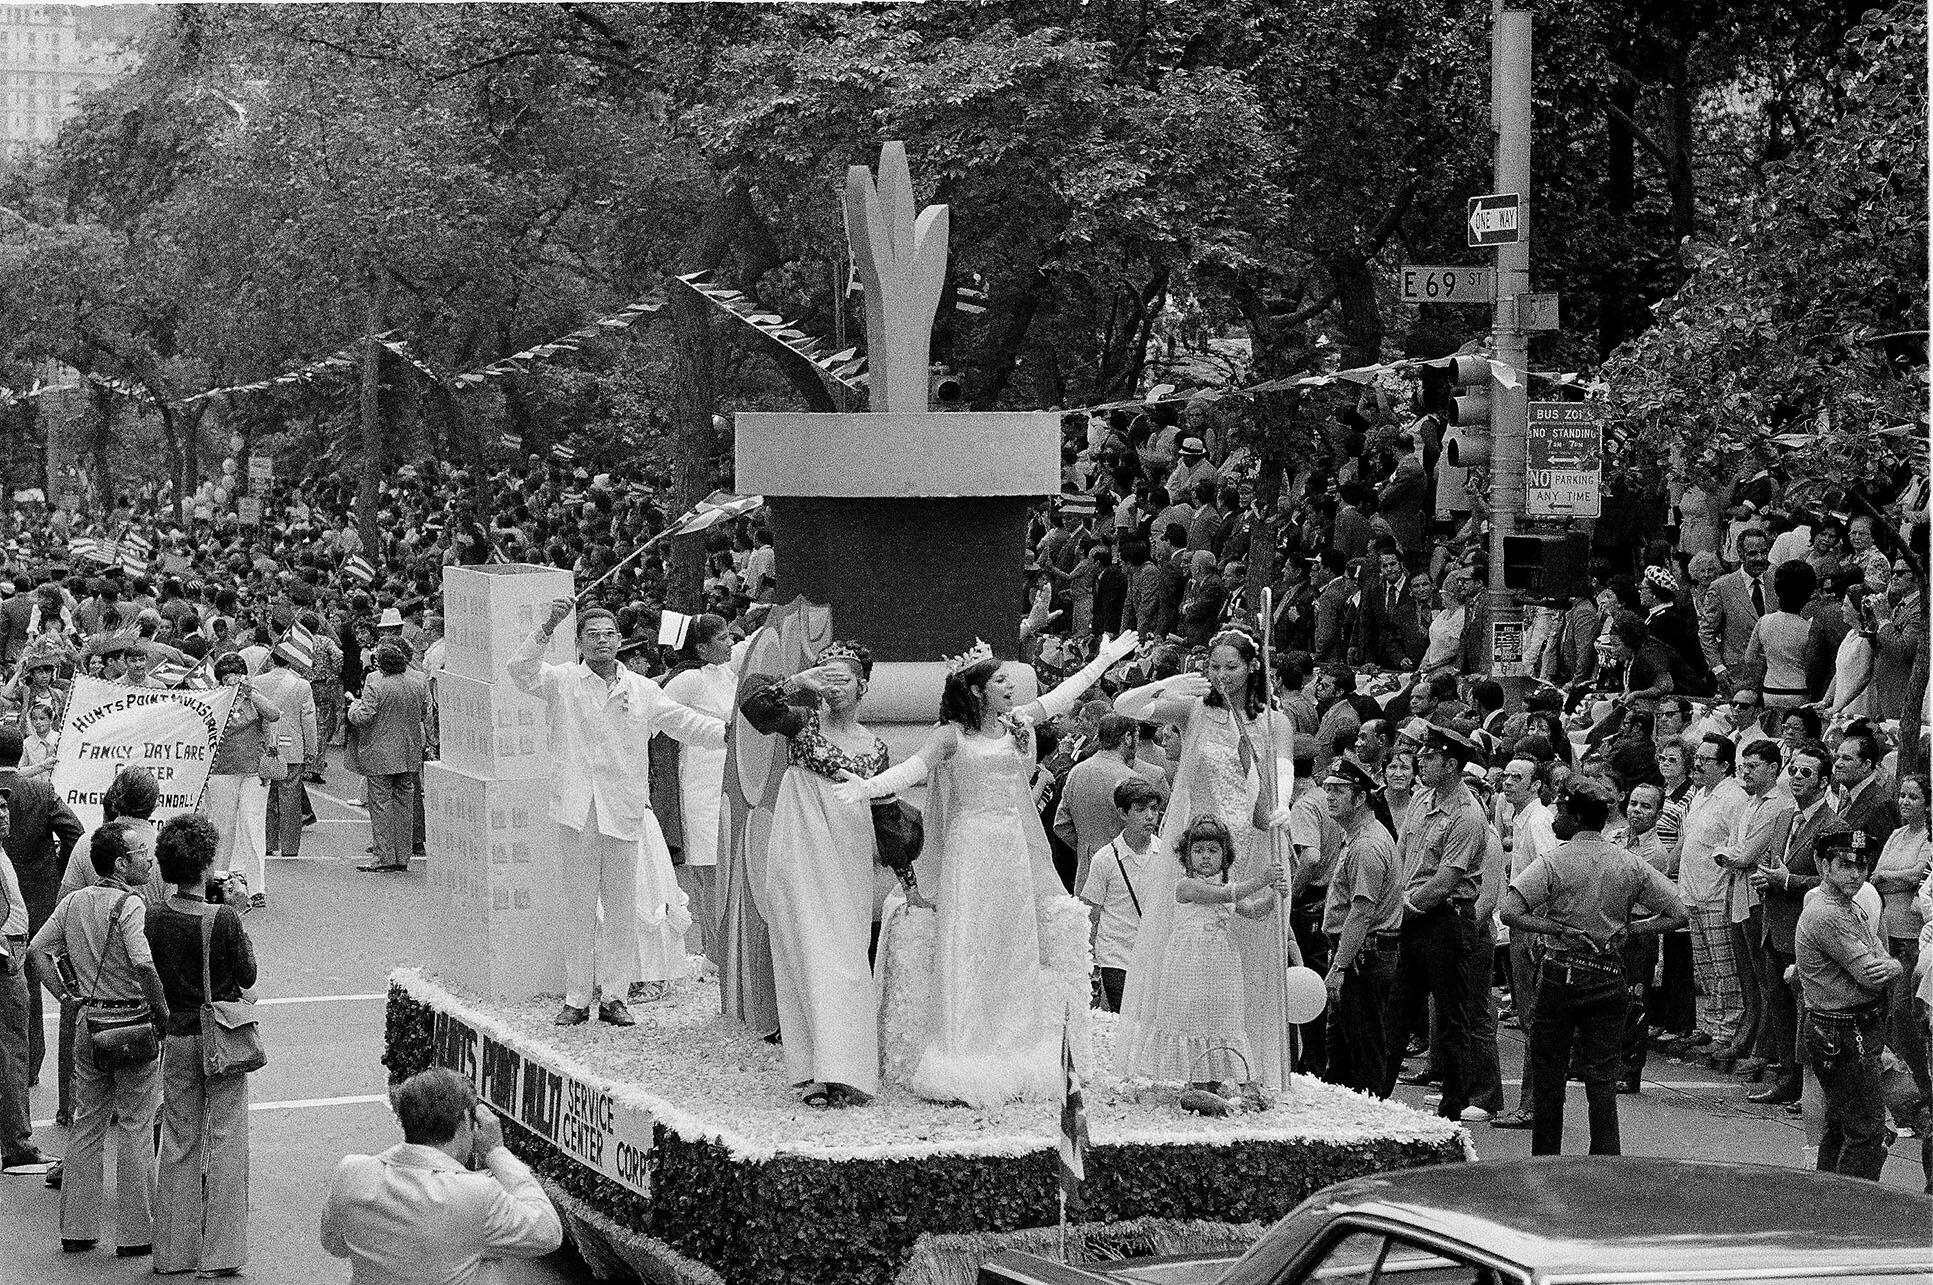 A float rolls down the street as part of the Puerto Rican Day Parade, Fifth Avenue, New York, 1971. (Photo from Associated Press.)